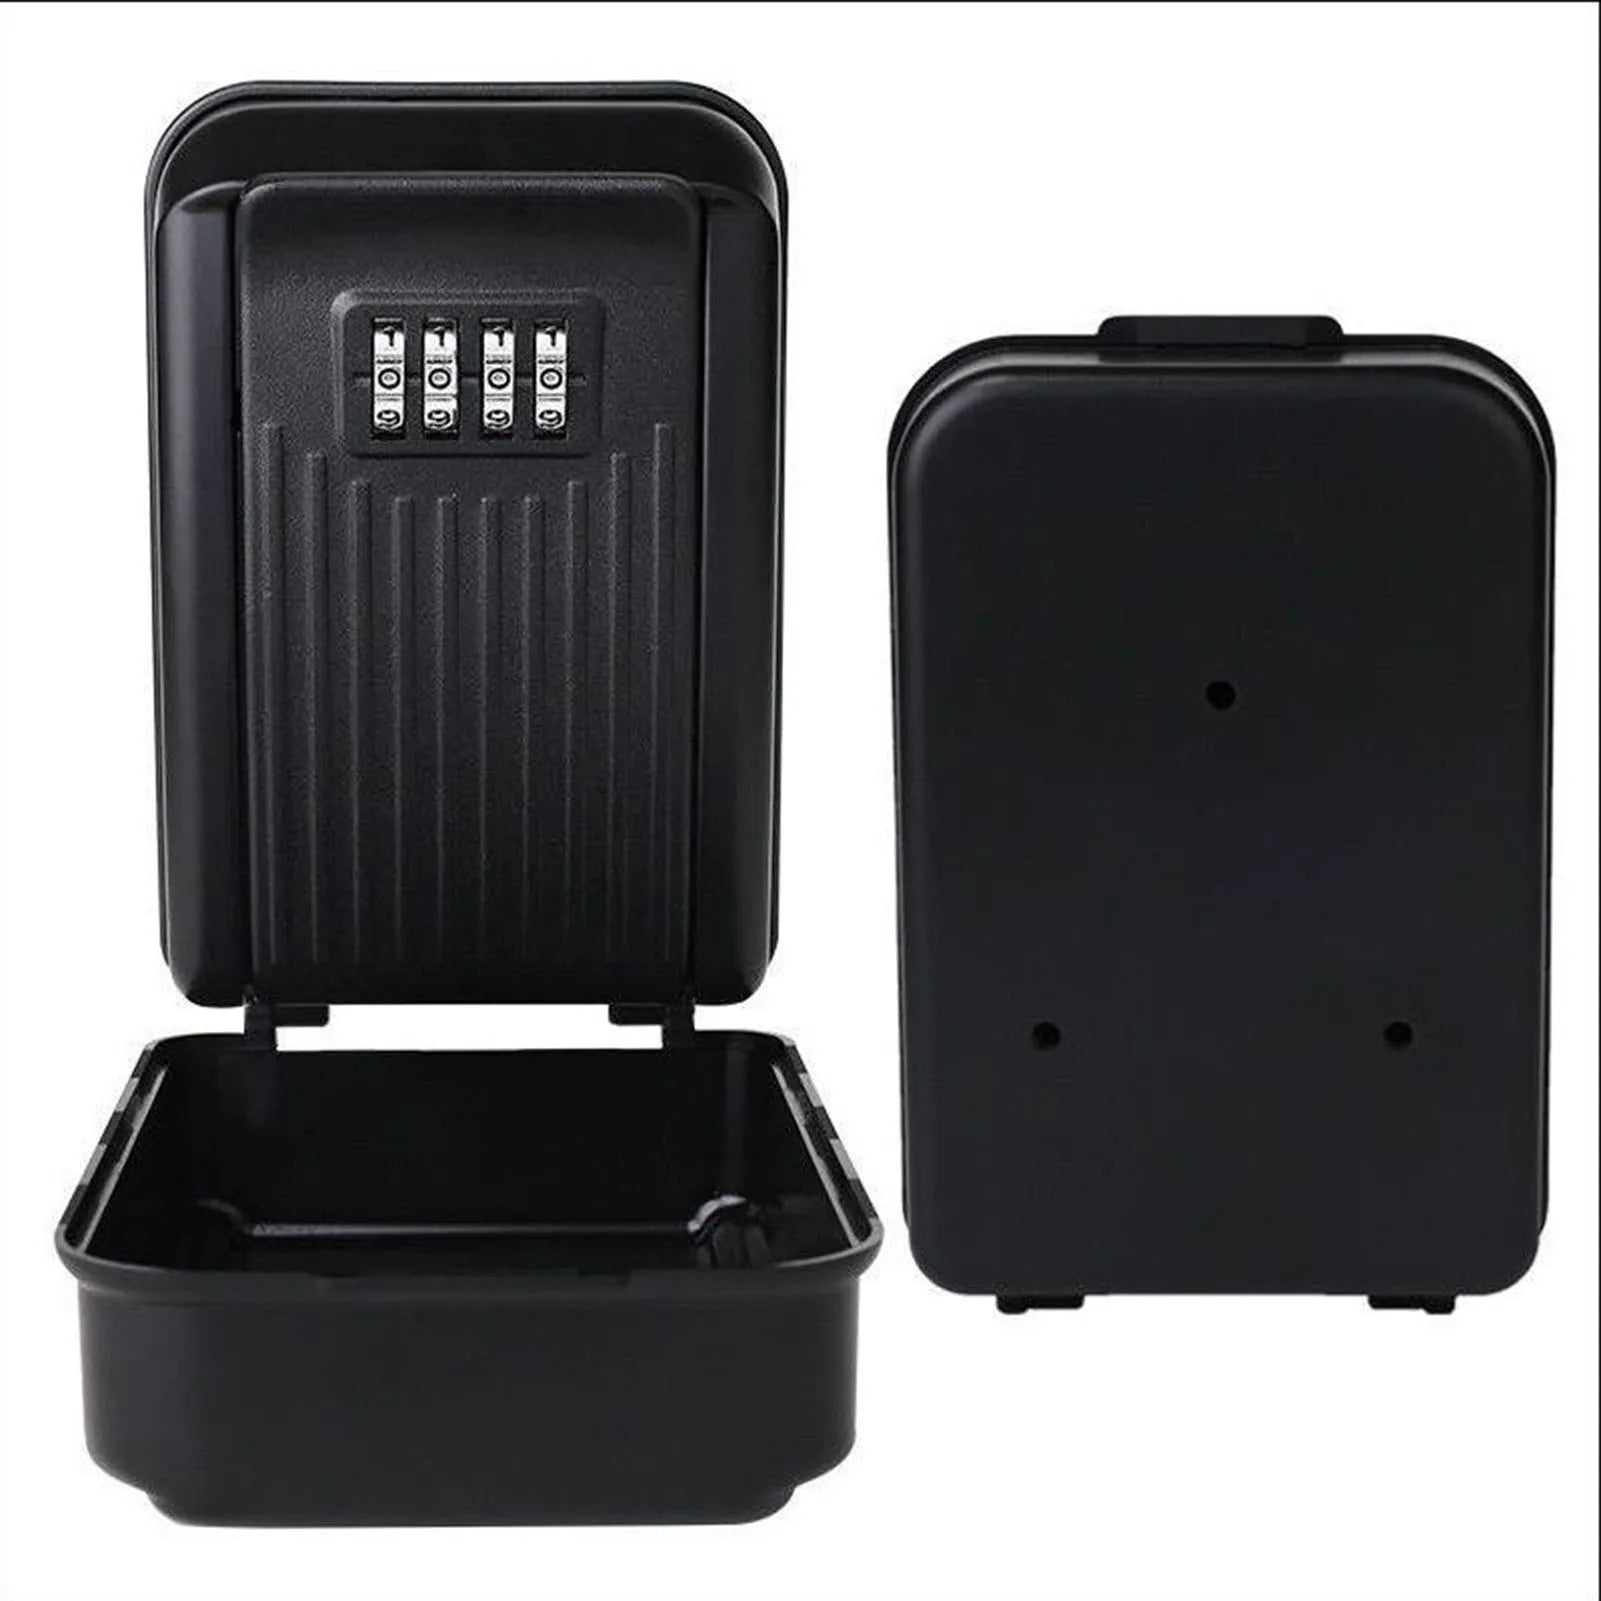 Black Key Lock Box with Waterproof Case Aluminum Alloy Wall Mount Safe Lockbox for Home Office Garage Security Protection